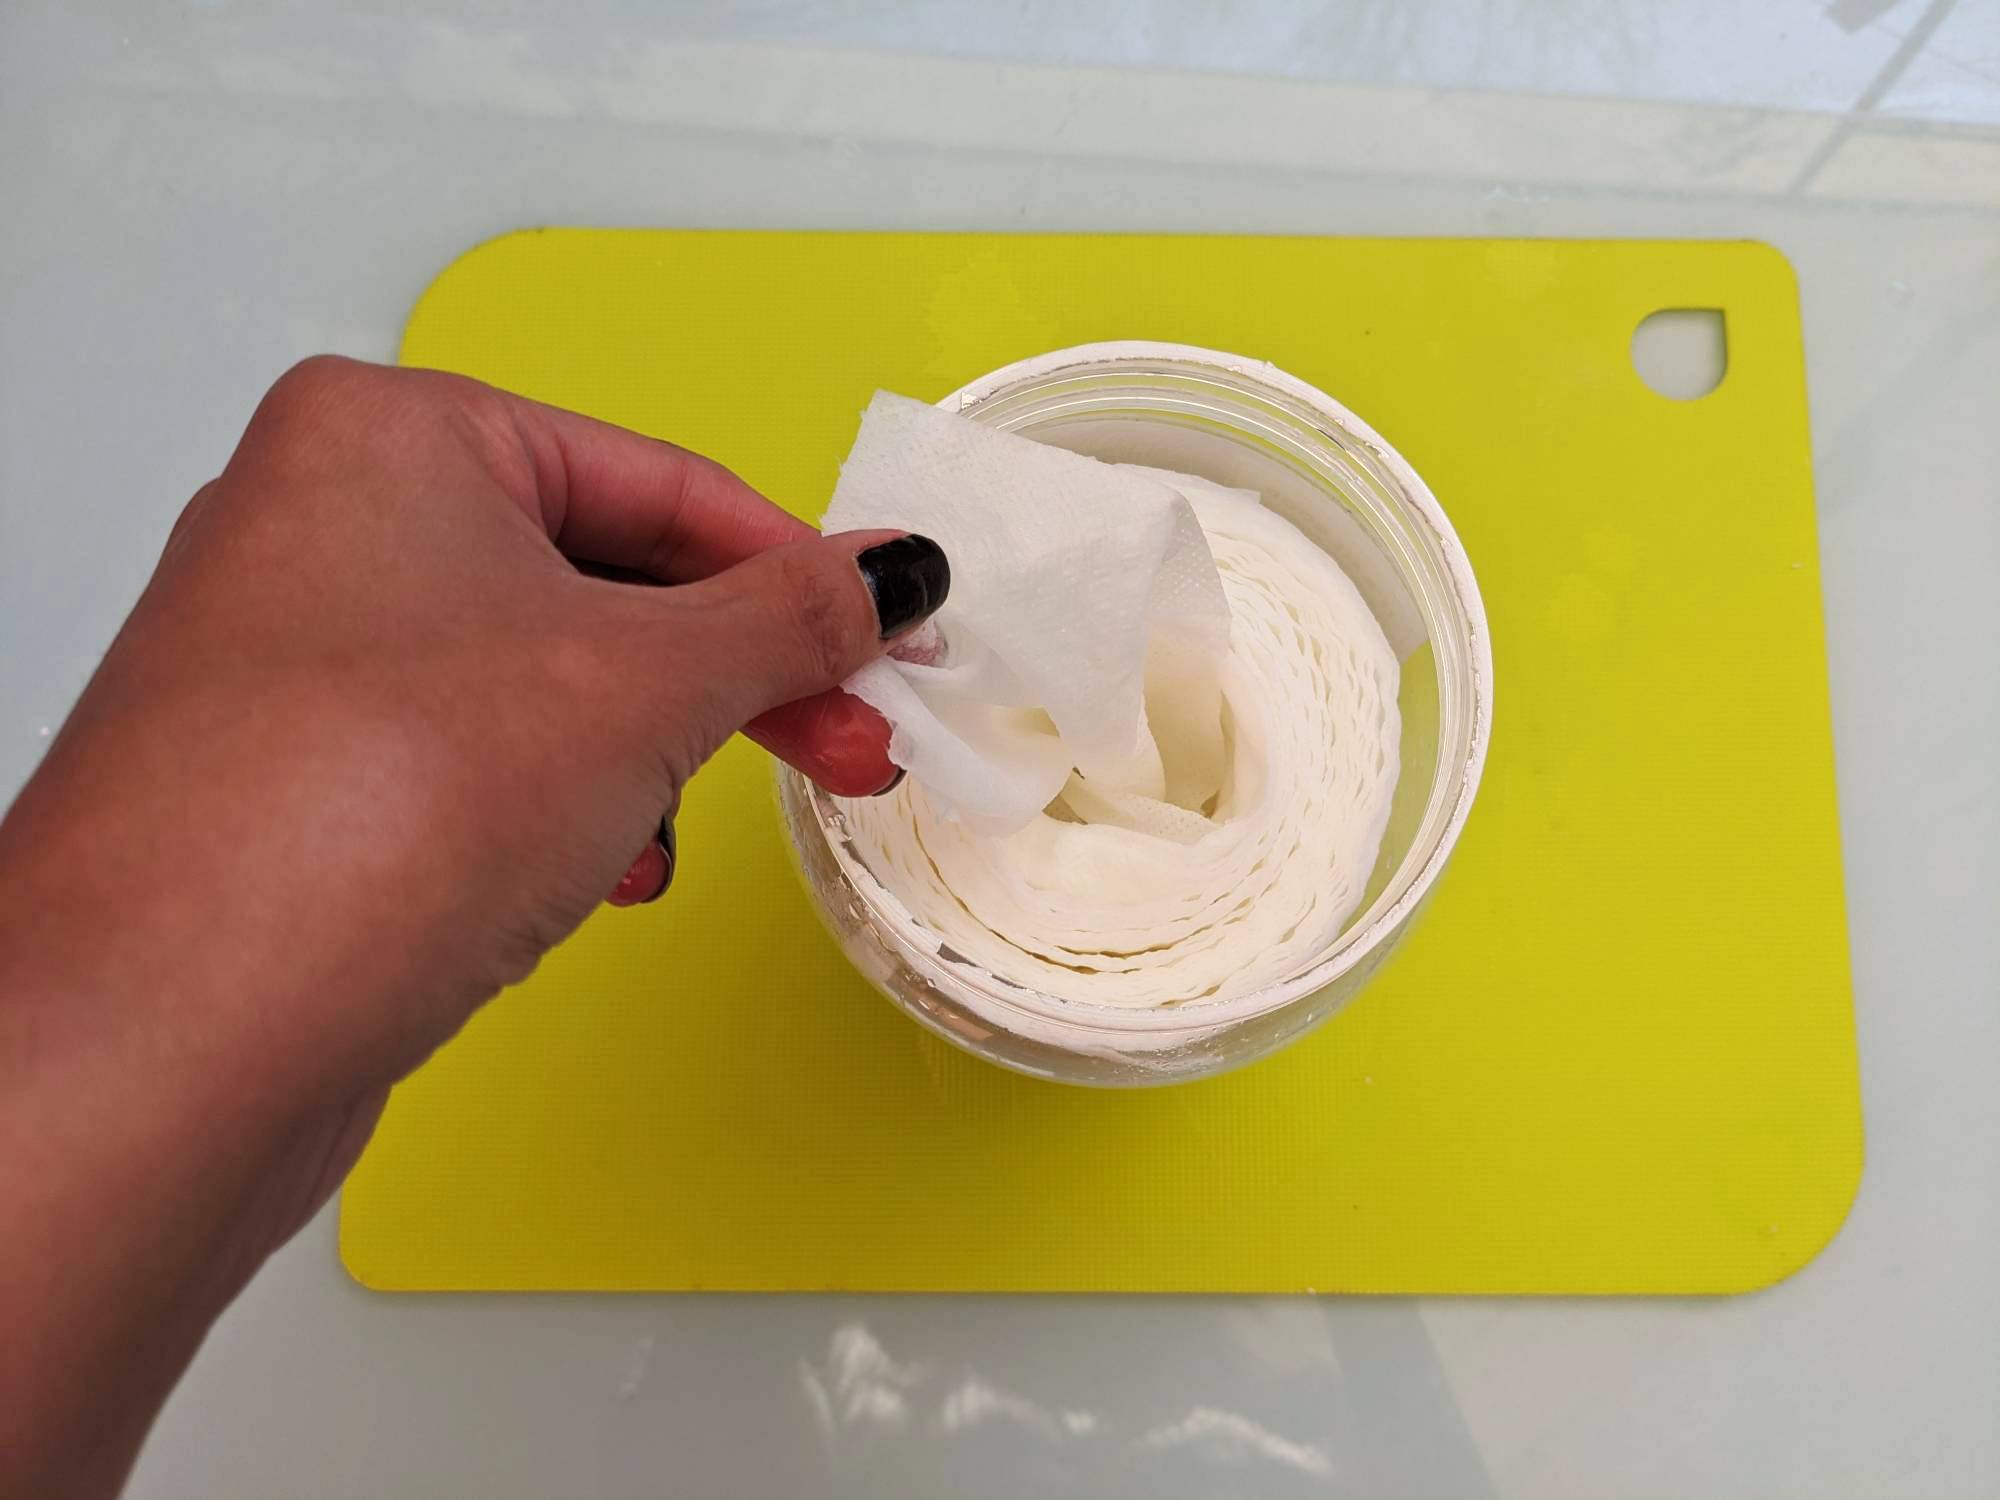 How To Make Your Own Disinfecting Wipes